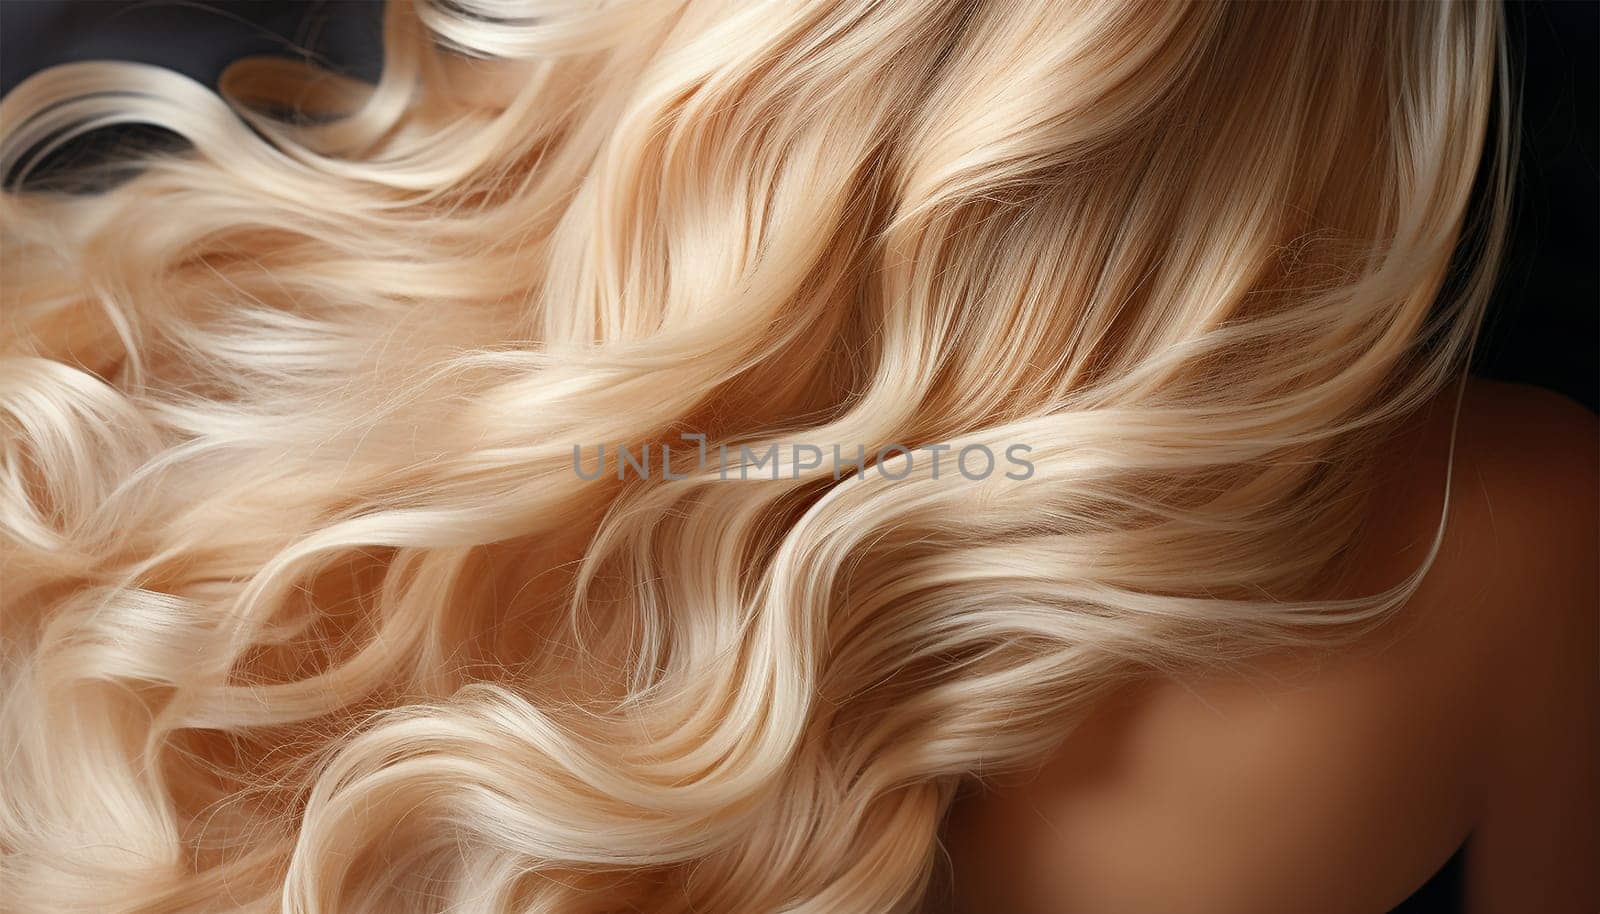 Blond hair background texture. Beauty product advertisement concept. Blond hair close-up as a background. Women's long blonde hair. Beautifully styled wavy shiny curls. Hair coloring. Hairdressing procedures, extension. by Annebel146